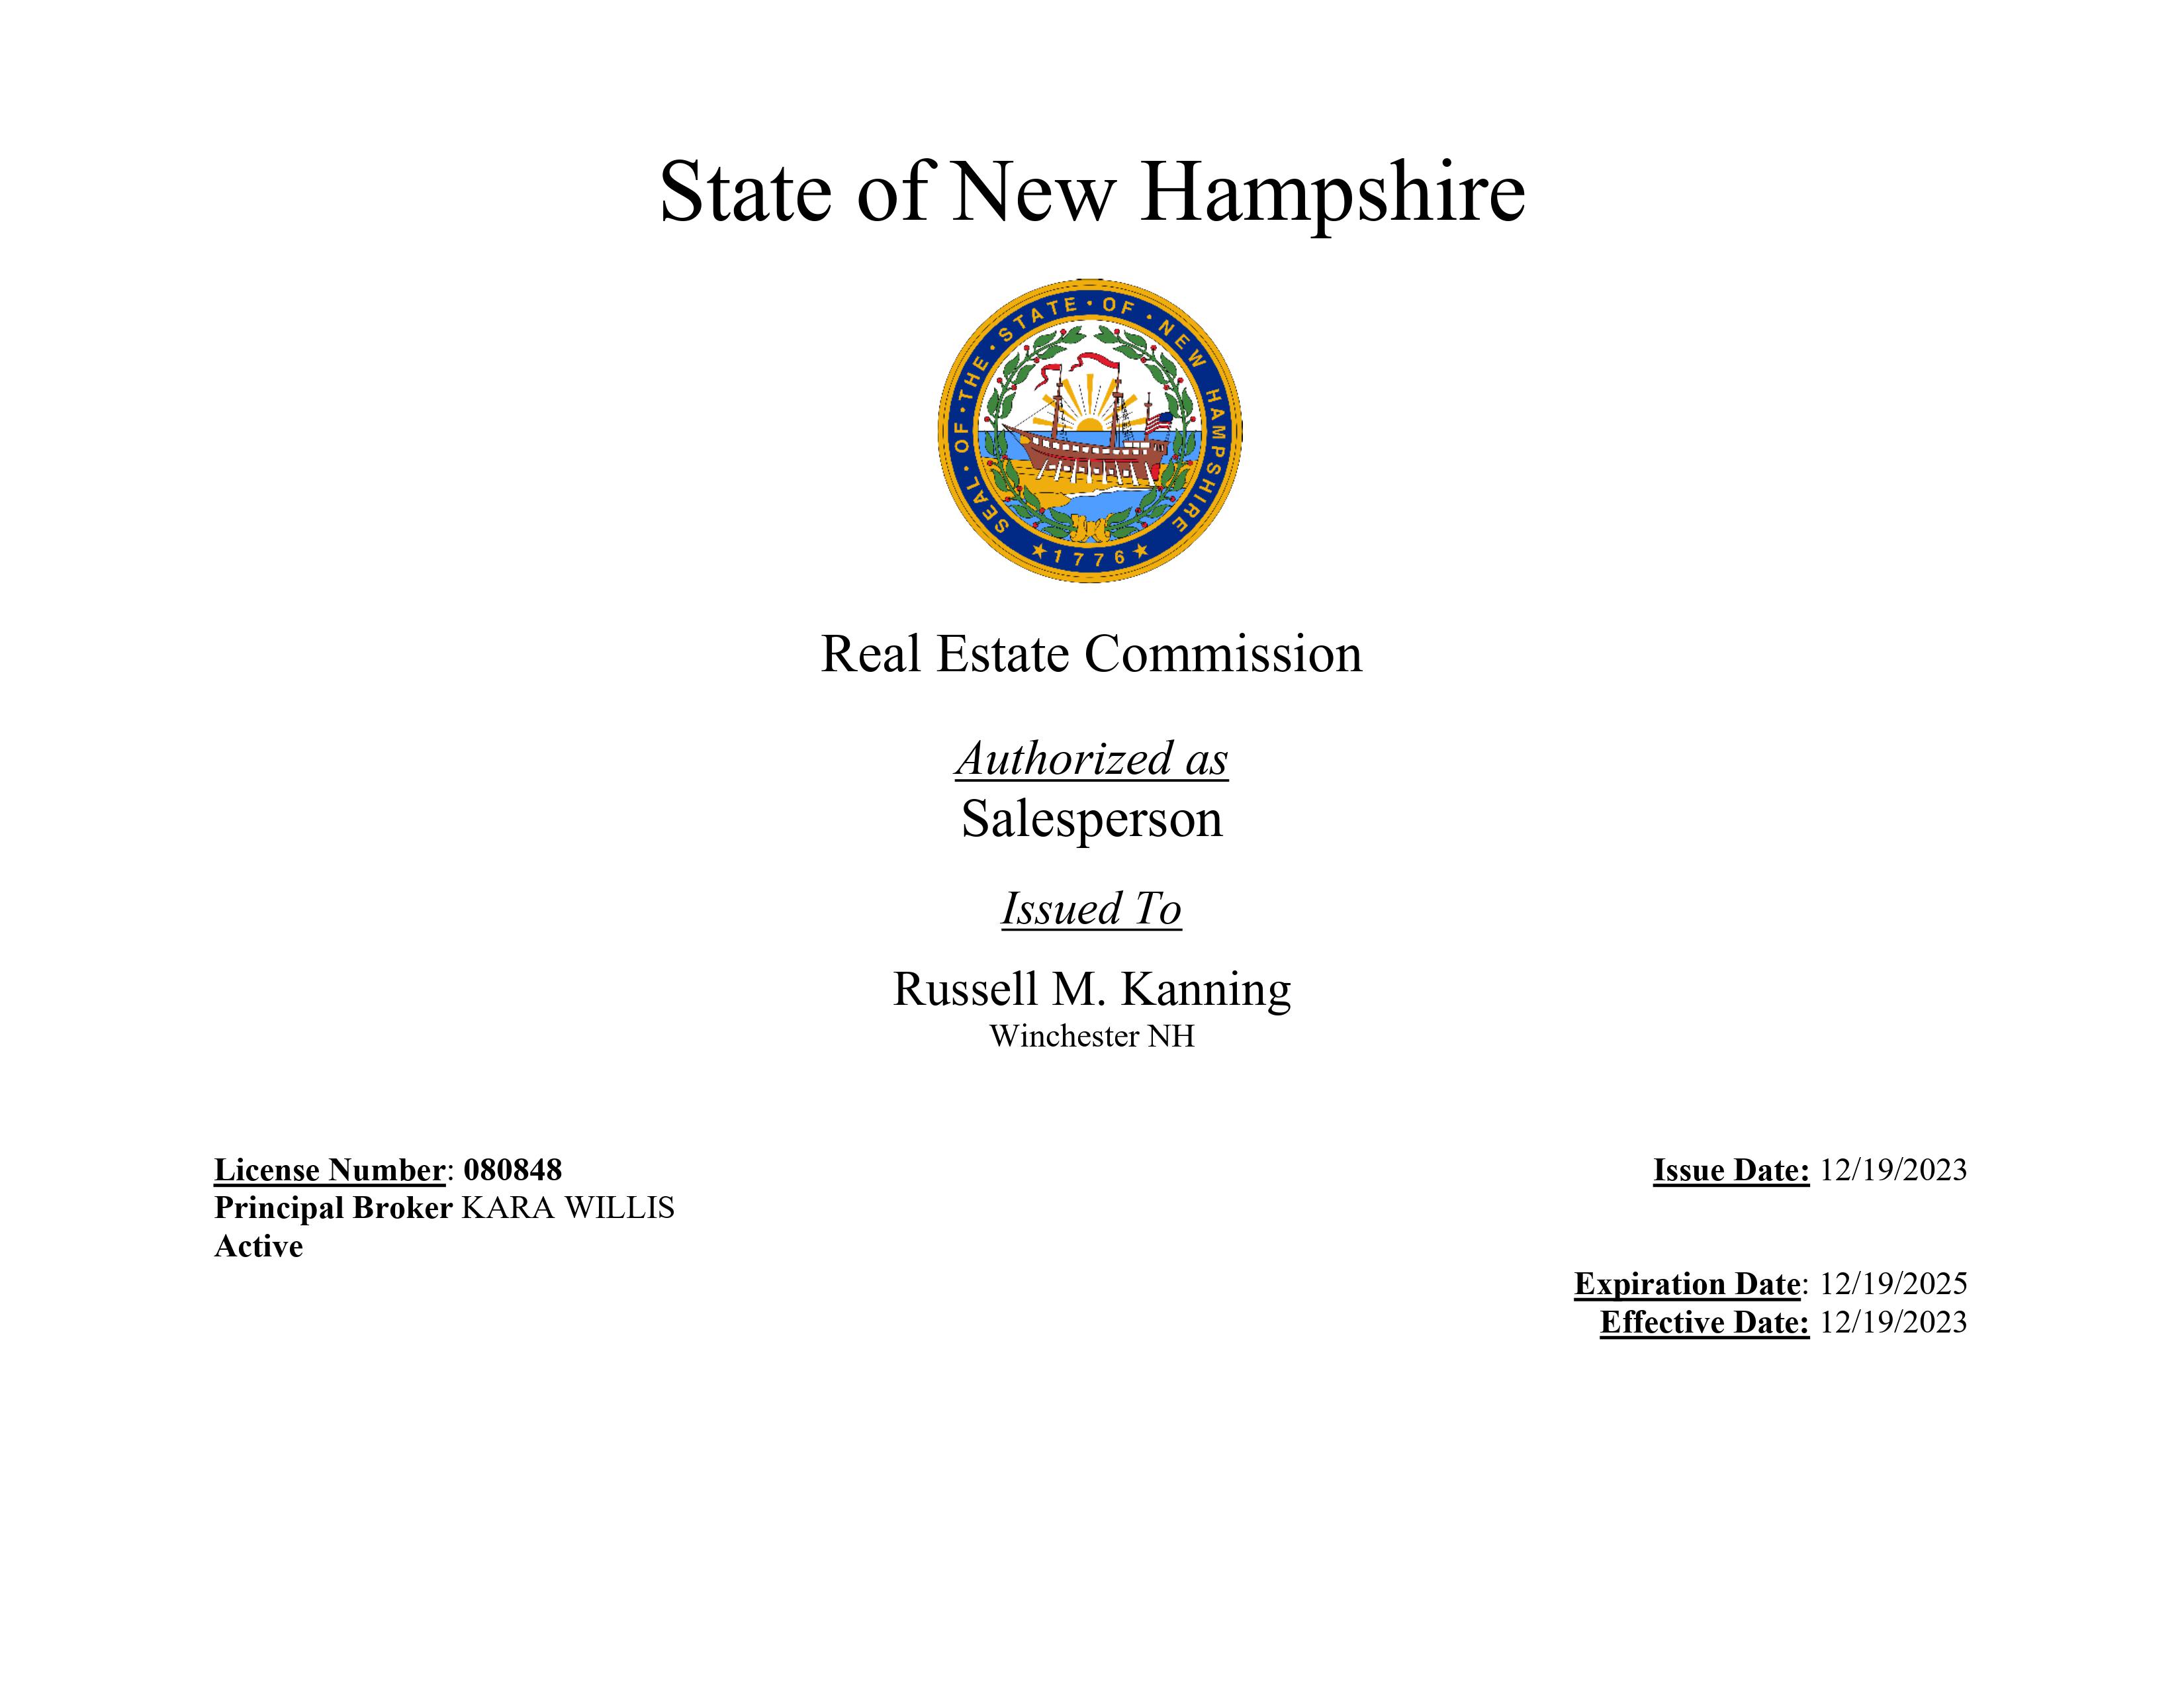 NH Real Estate License 2023to2025 Salesperson